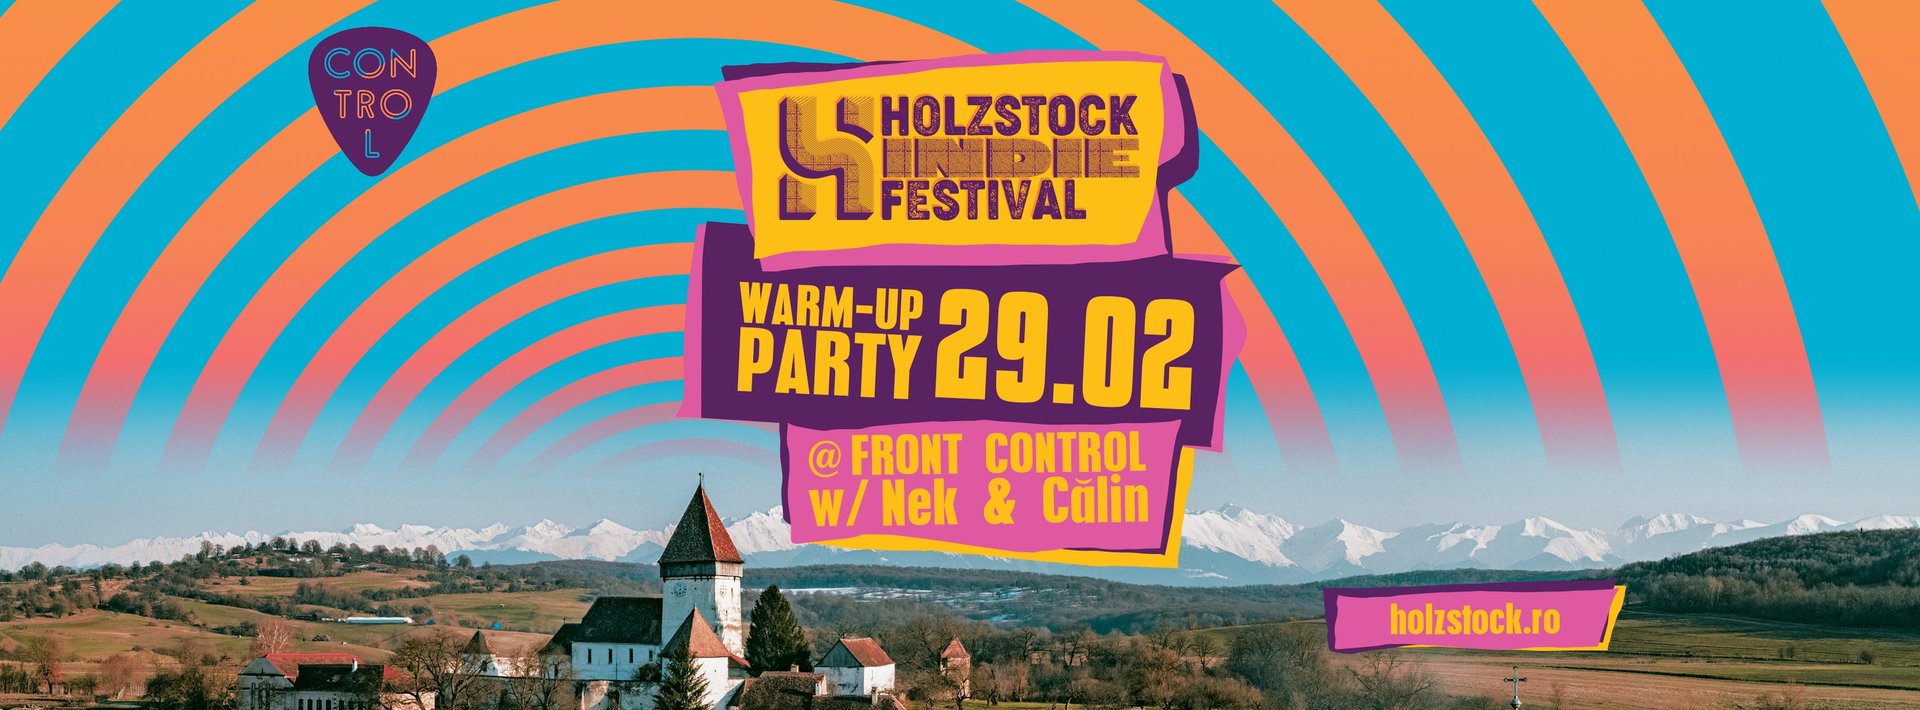 Holzstock Warm-Up-Party